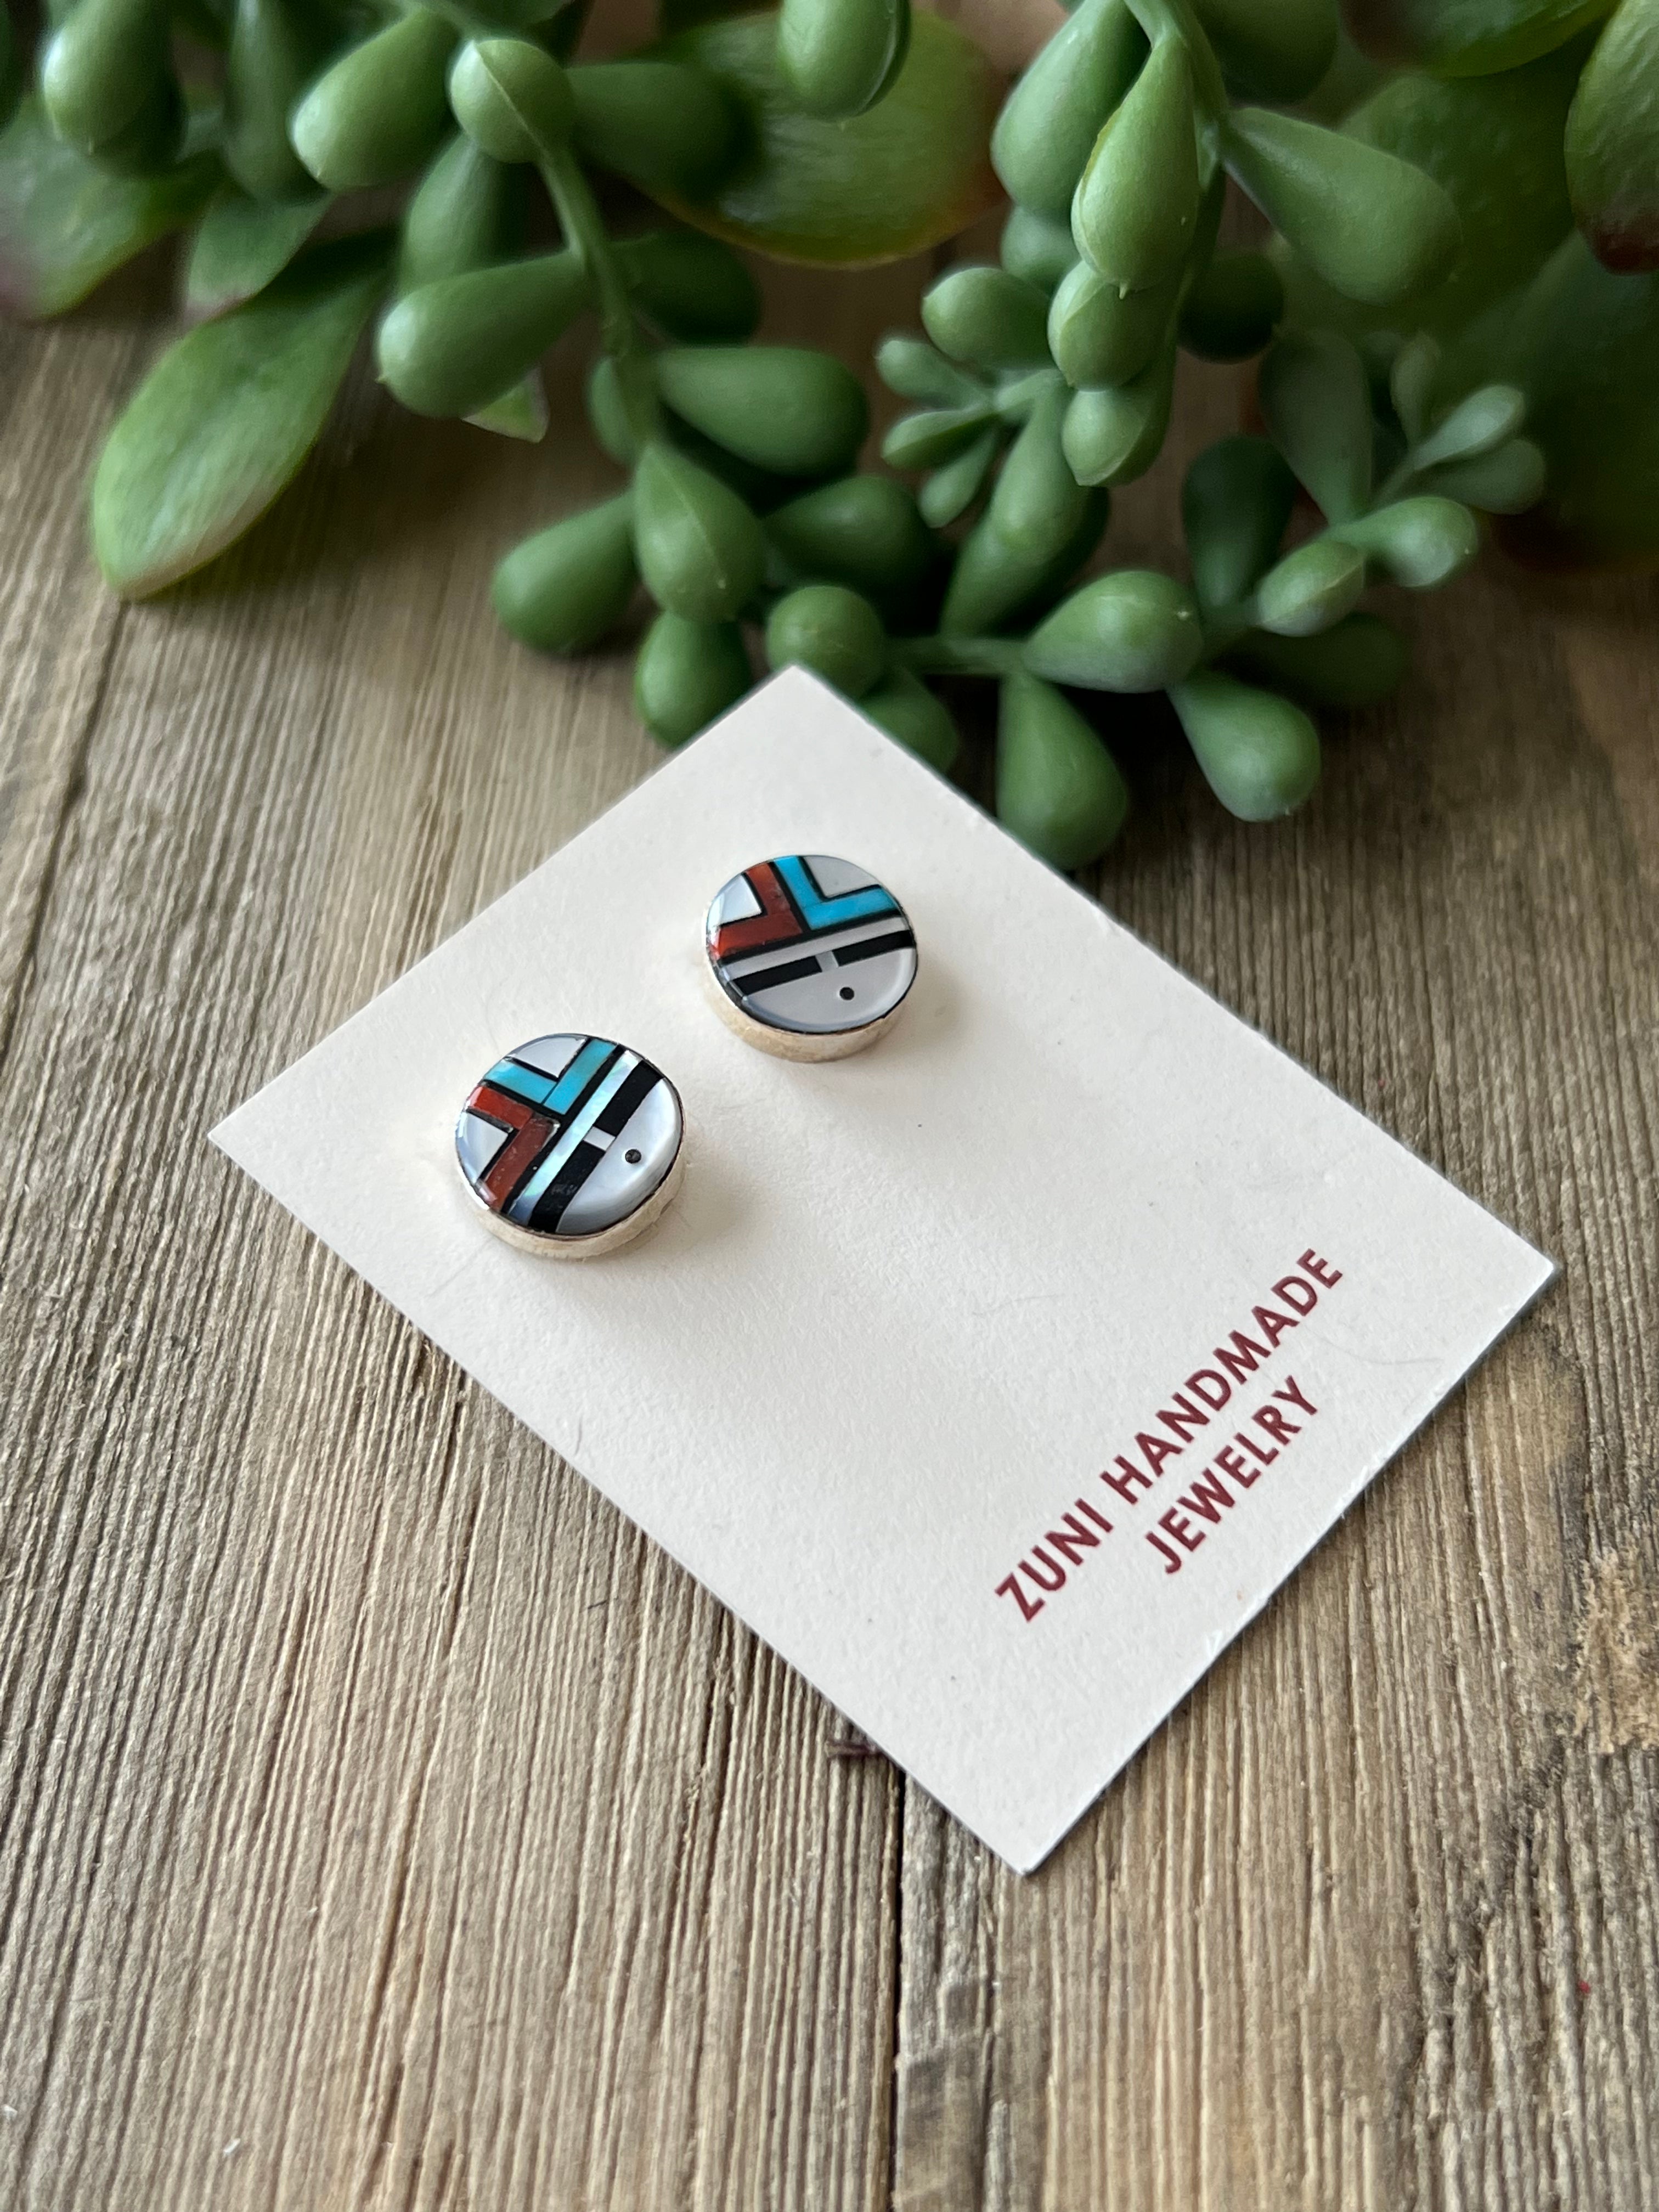 Zuni Made Multi Stone & Sterling Silver Post Inlay Earrings